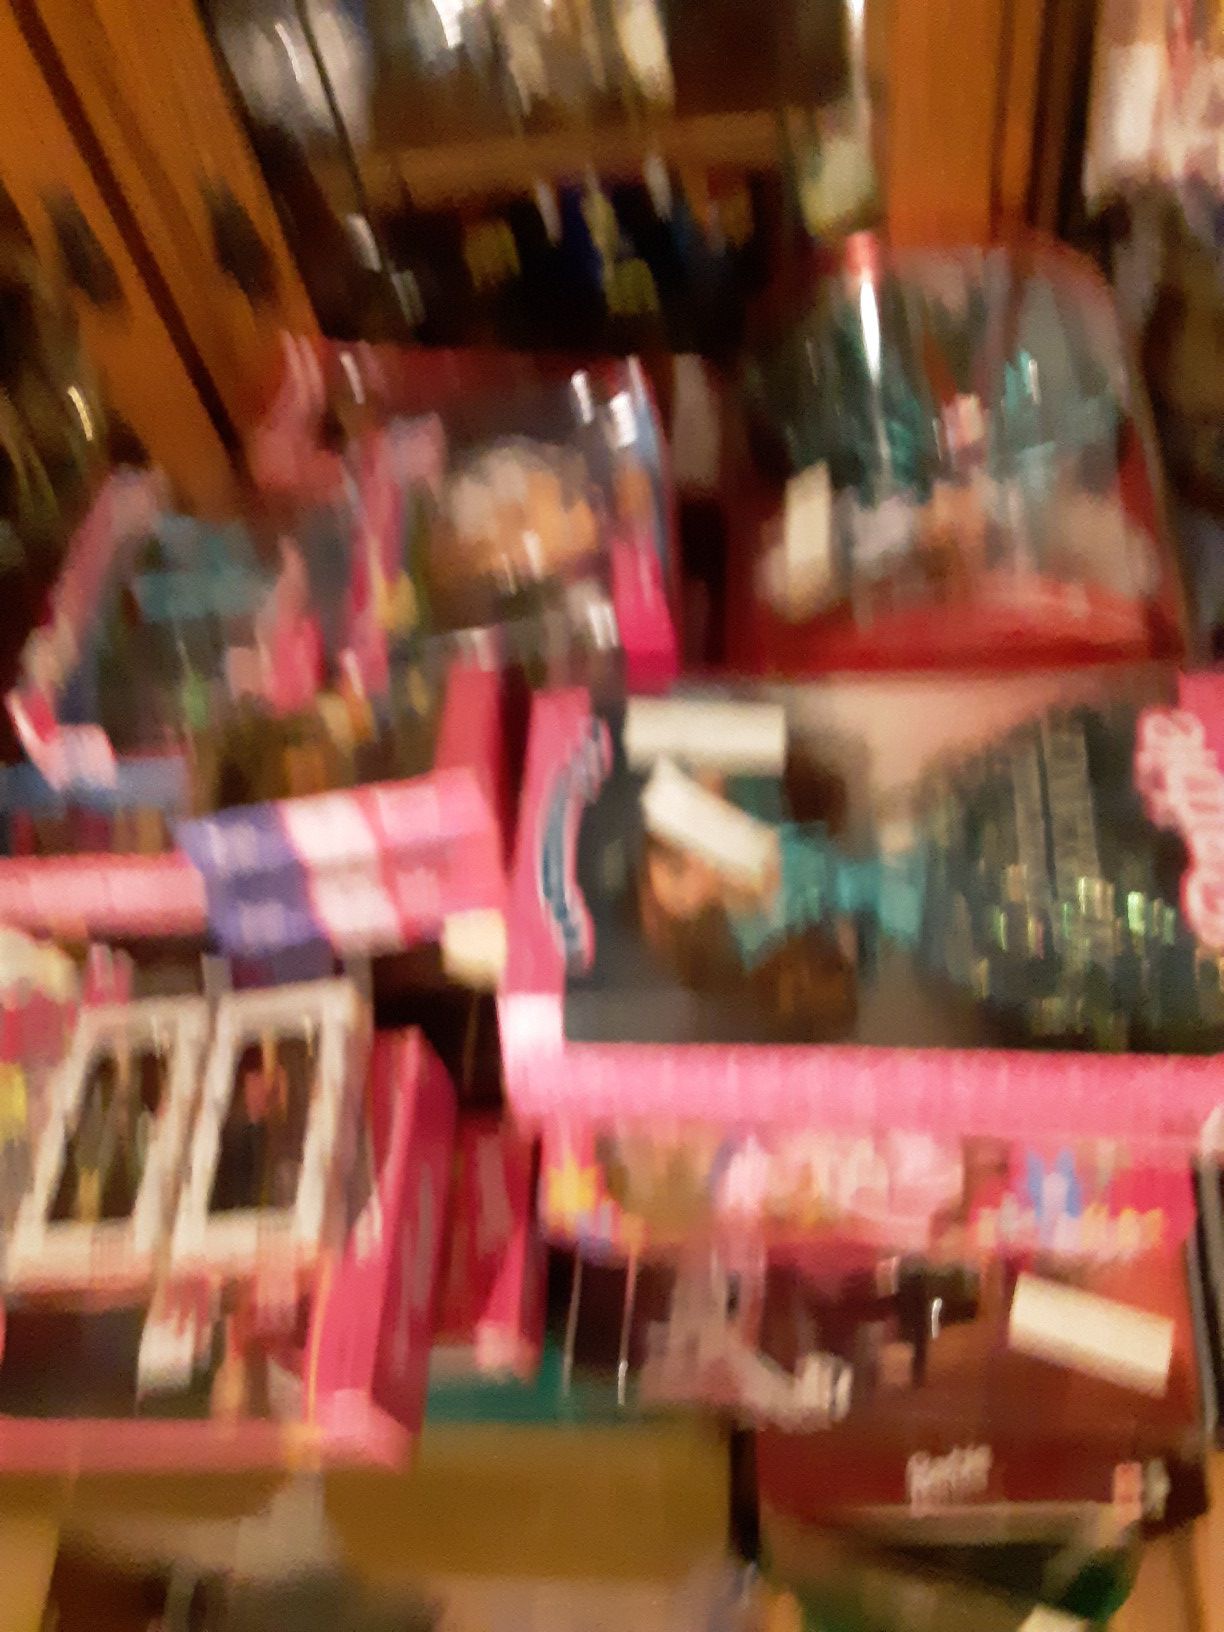 97 old collectable barbies